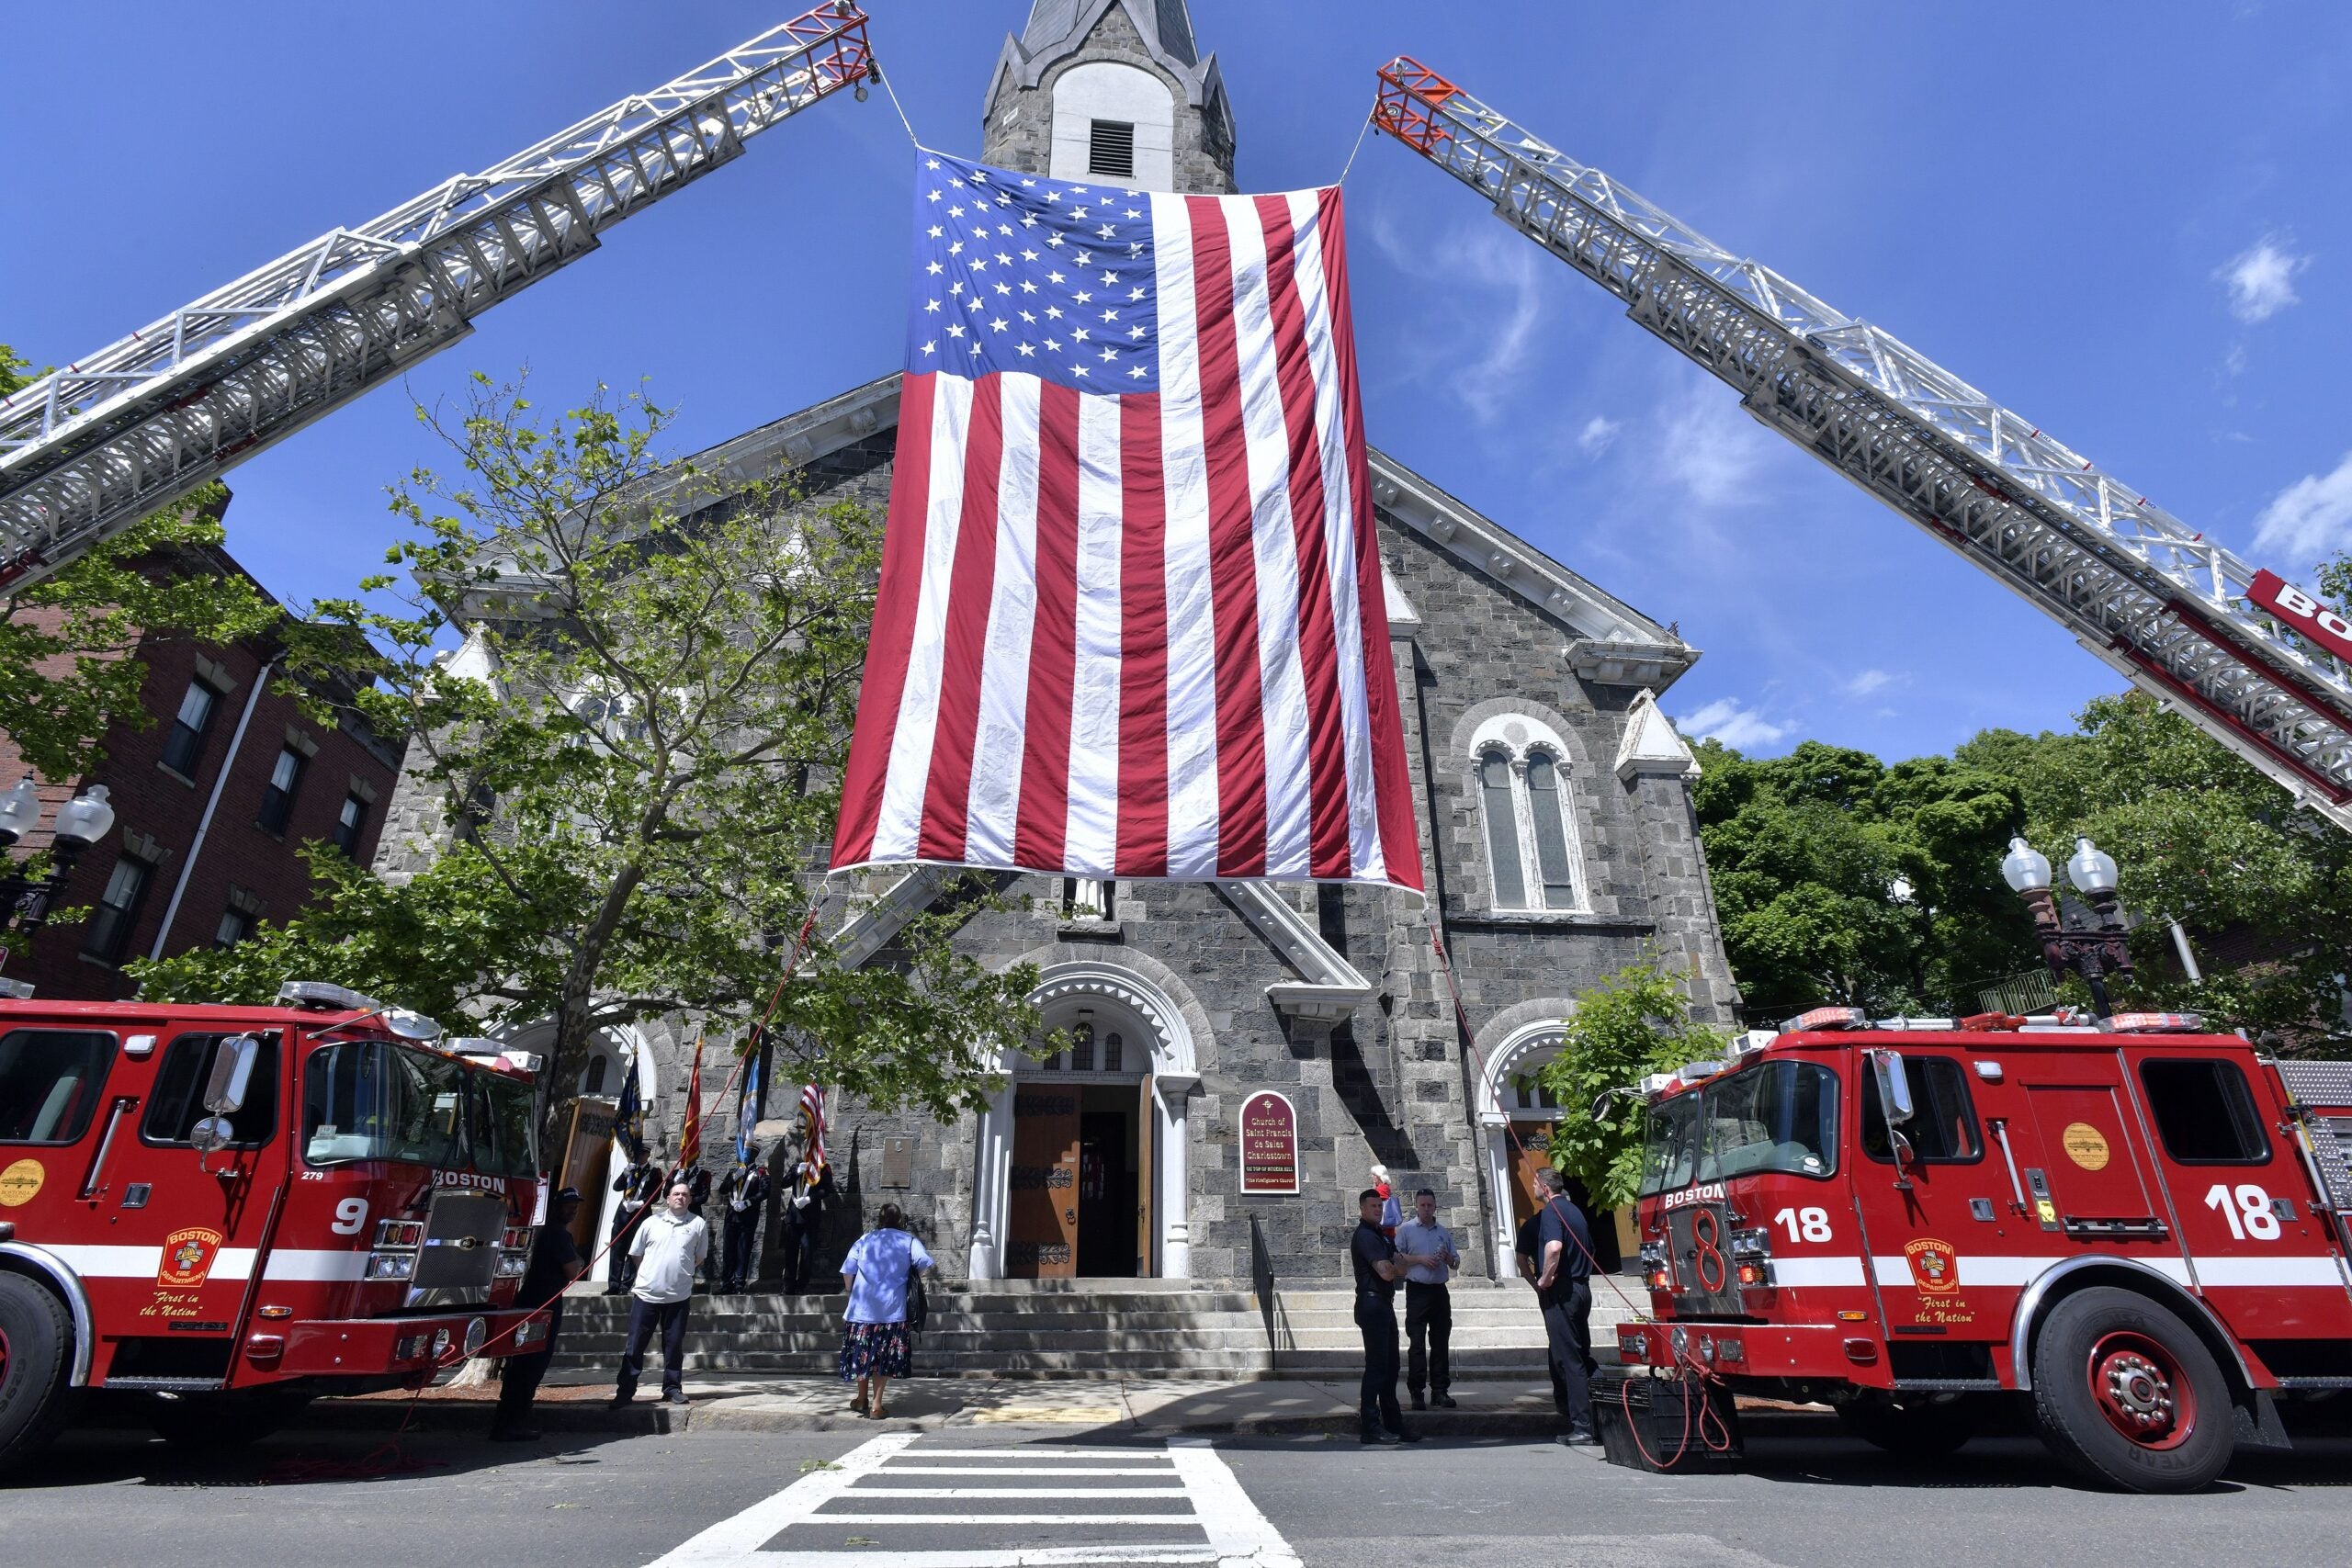 Boston fire department chaplain retires after 60 years, honored by community